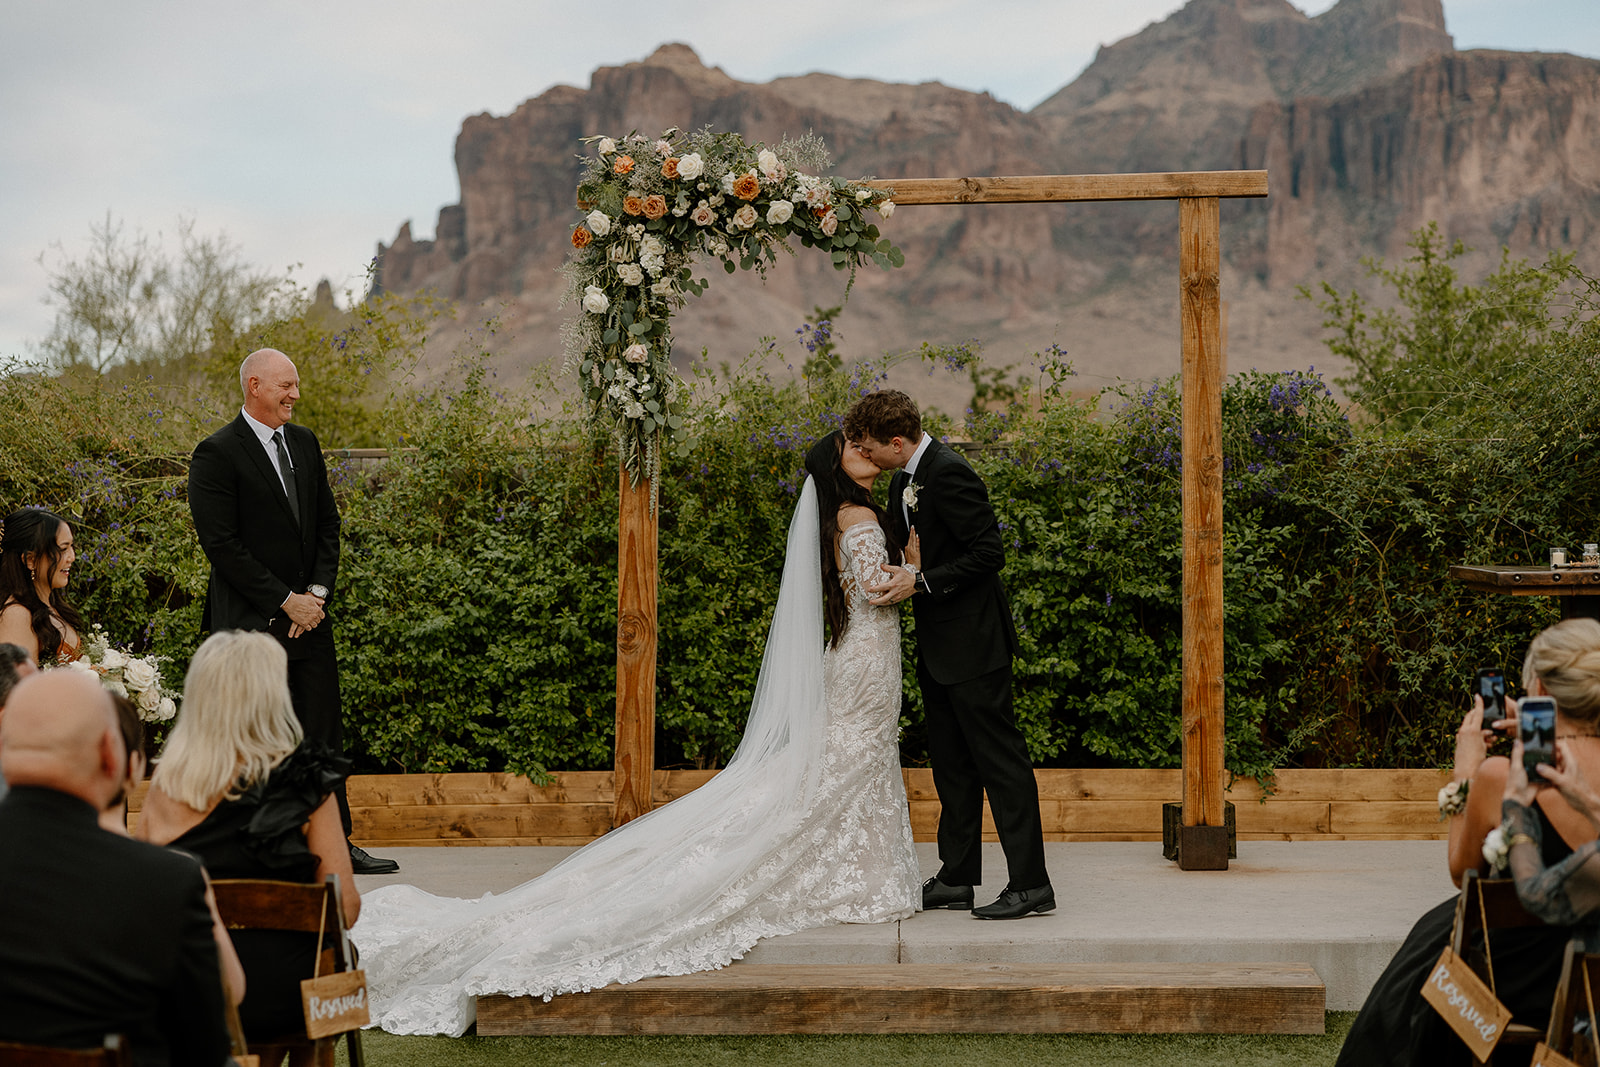 bride and groom share their first kiss as a married couple at the end of their dreamy Arizona desert wedding